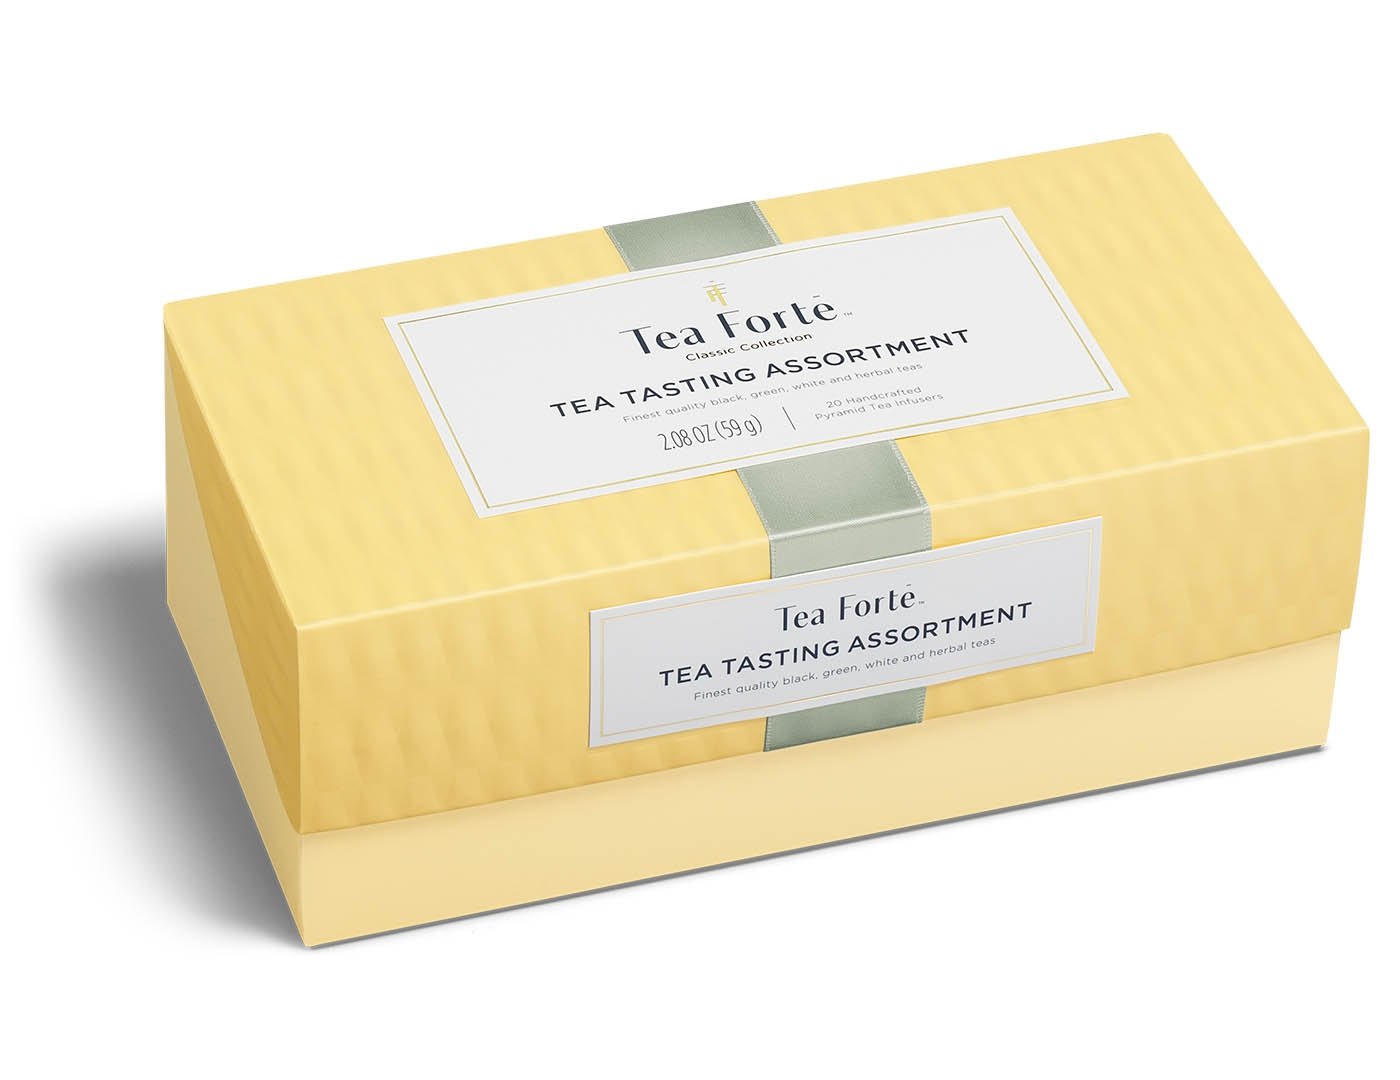 Tea Tasting tea assortment in a 20 count presentation box with lid closed